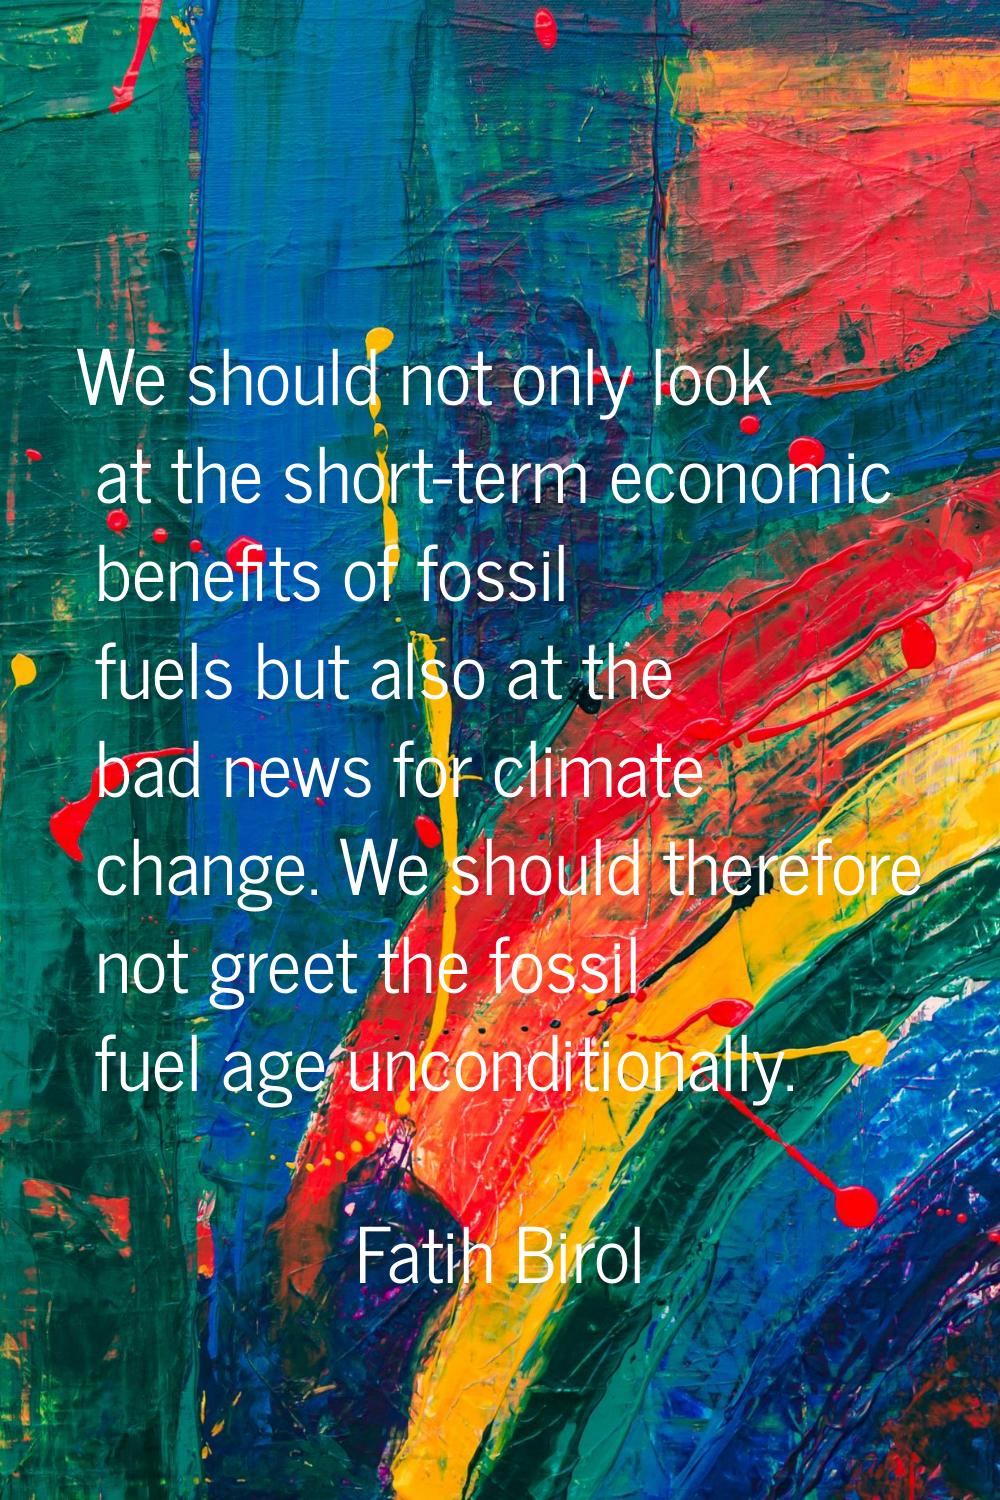 We should not only look at the short-term economic benefits of fossil fuels but also at the bad new